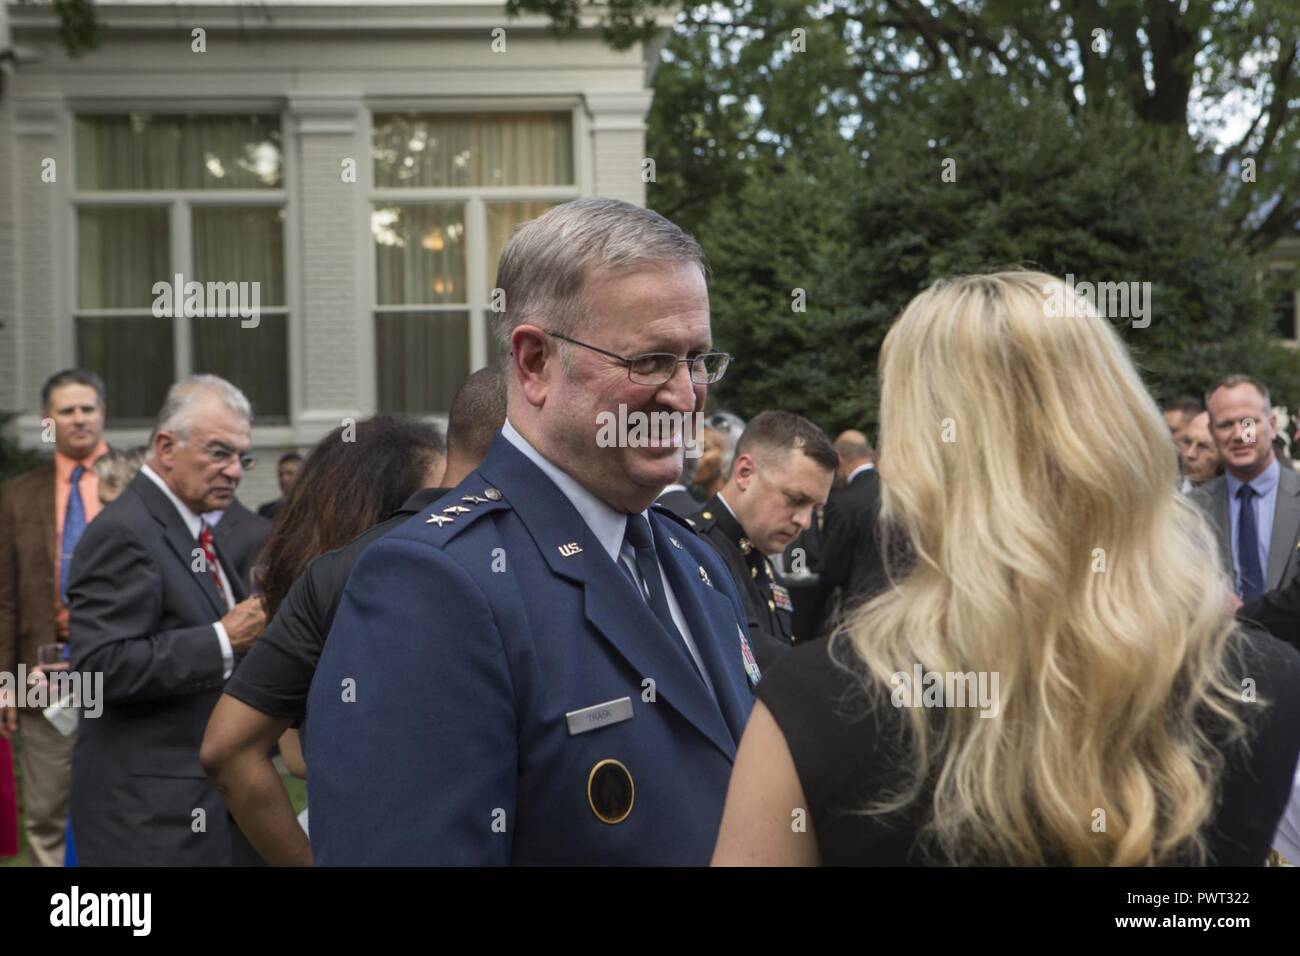 U.S. Air Force Lt. Gen. Thomas J. Trask, vice commander of Headquarters U.S. Special Operations Command (SOCOM), speaks with guests during a reception before an evening parade at Marine Barracks Washington, Washington, D.C., June 23, 2017. Evening parades are held as a means of honoring senior officials, distinguished citizens and supporters of the Marine Corps. Stock Photo